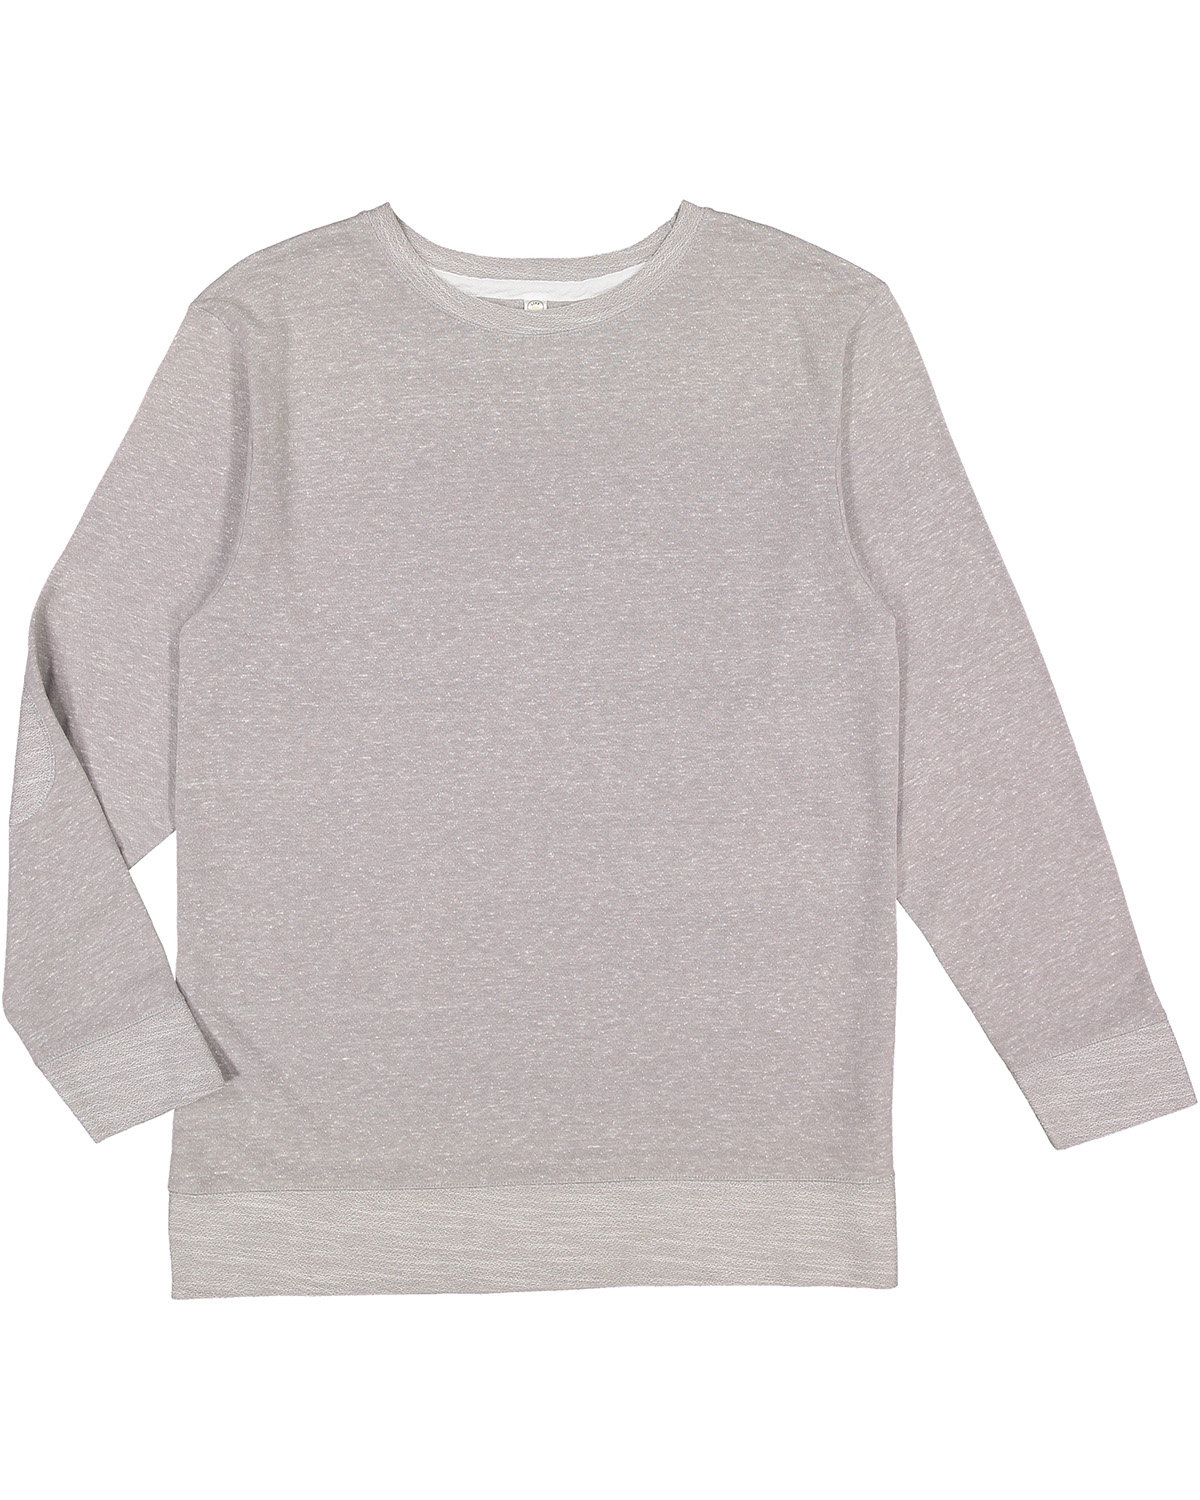 LAT Adult Harborside Melange French Terry Crewneck with Elbow Patches gray melange 